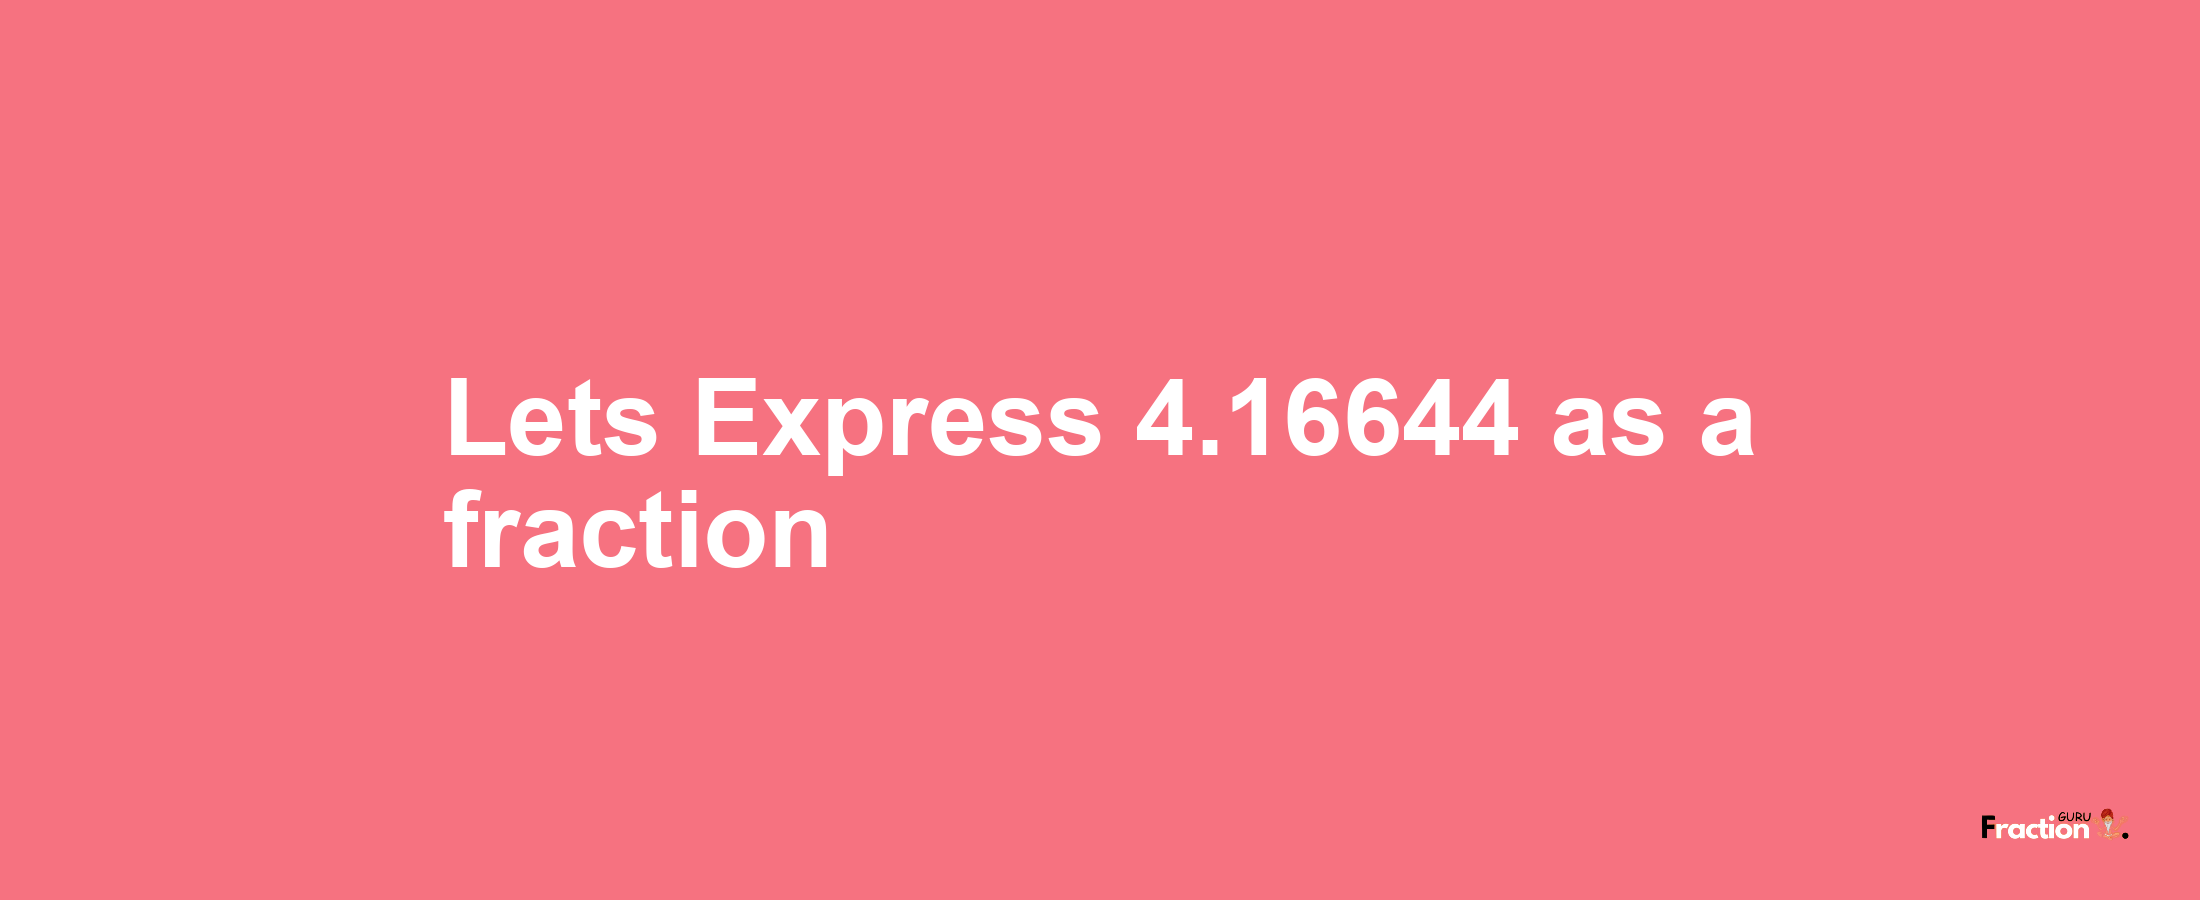 Lets Express 4.16644 as afraction